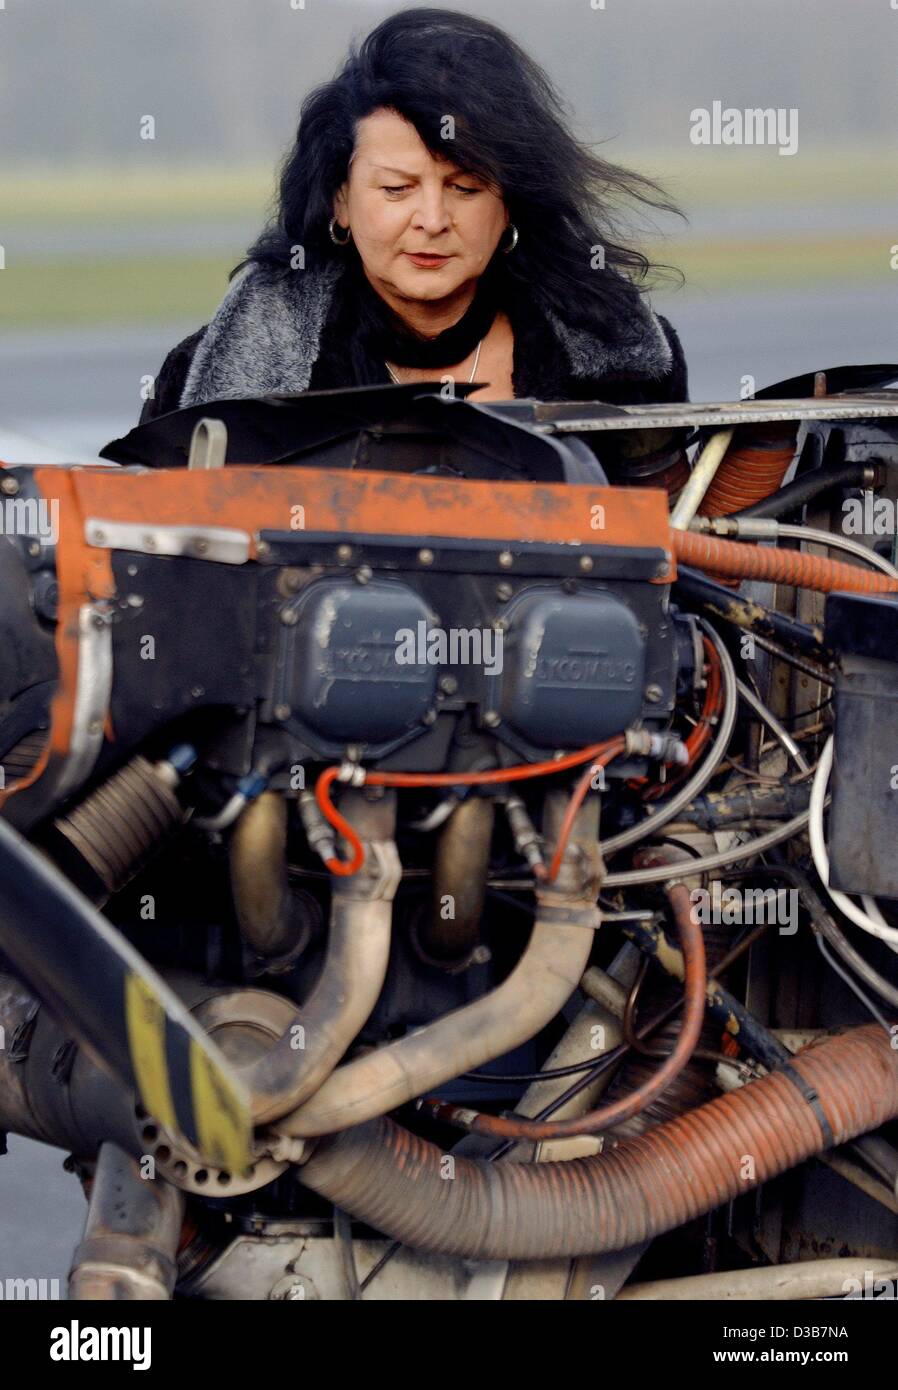 (dpa) - Kimberly Marx is checking her single engine aircraft (Morane, 180 horsepower) before taking off from regional airport Dinslaken, Germany, 26 November 2002. Kimberly, who was a man called 'Manfred' until 1996, has been in the business for 25 years. She is showing the banner of the circus 'Fli Stock Photo